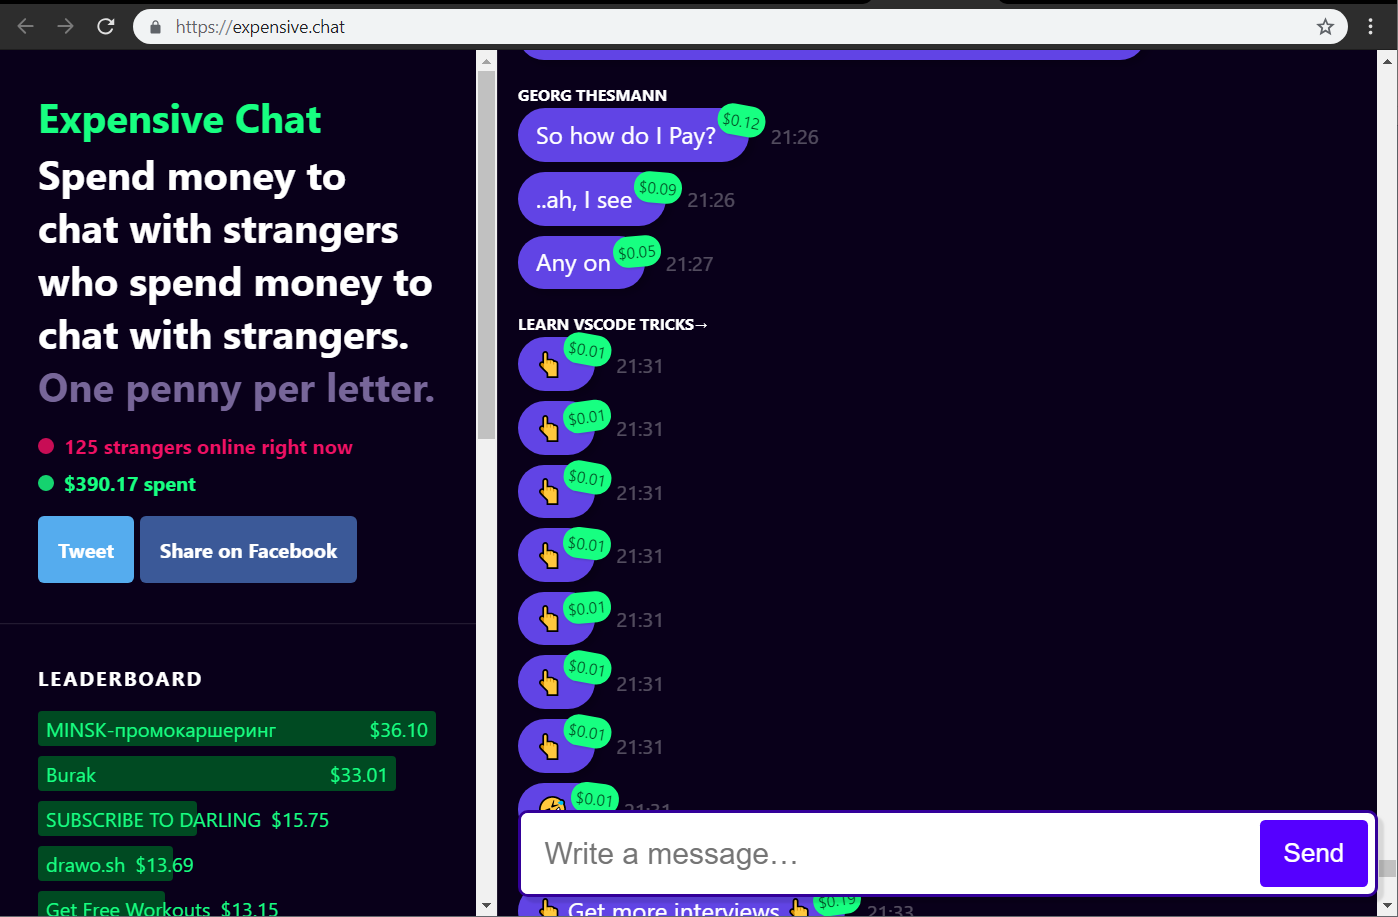 This Website/Chat-Group Is Charging People For Every Character They Text